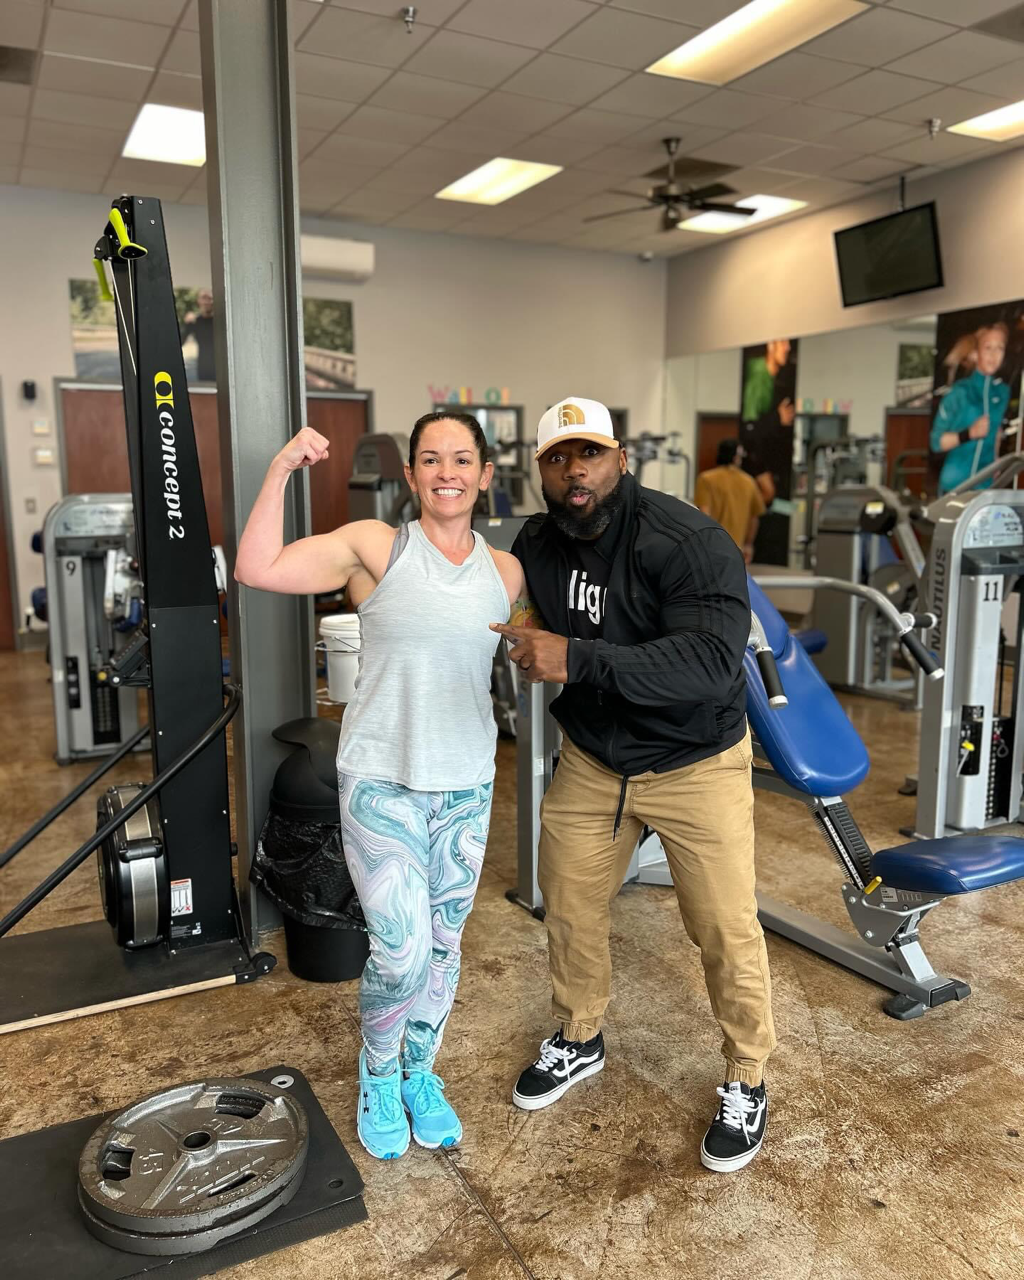 Fit Emmett Fort Mill Tega Cay Indian Land and Rock Hill Top Personal Trainer Providing The Best Personal Training Programs.